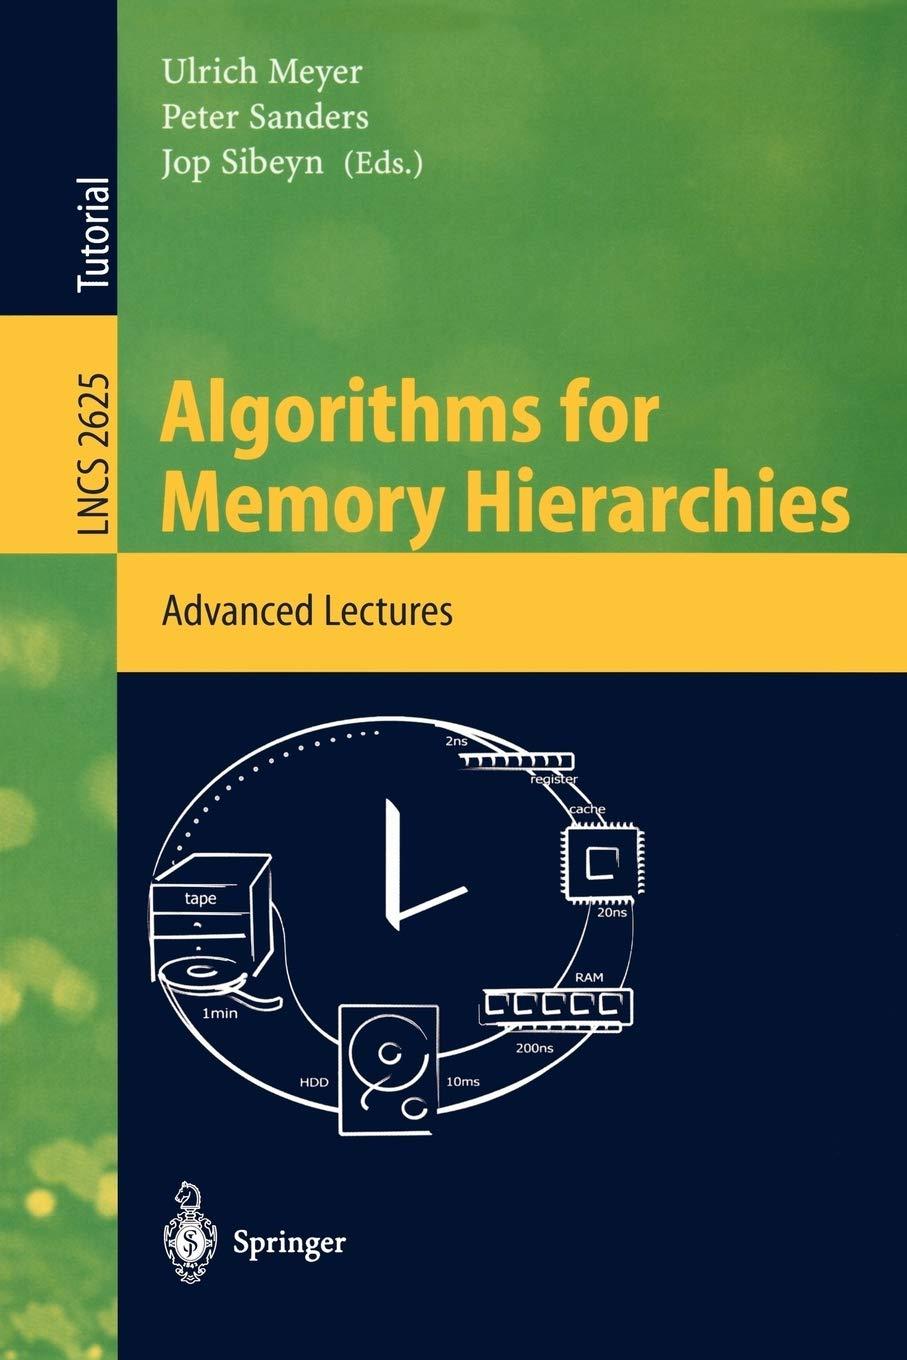 algorithms for memory hierarchies advanced lectures 2003rd edition ulrich meyer, peter sanders, jop sibeyn